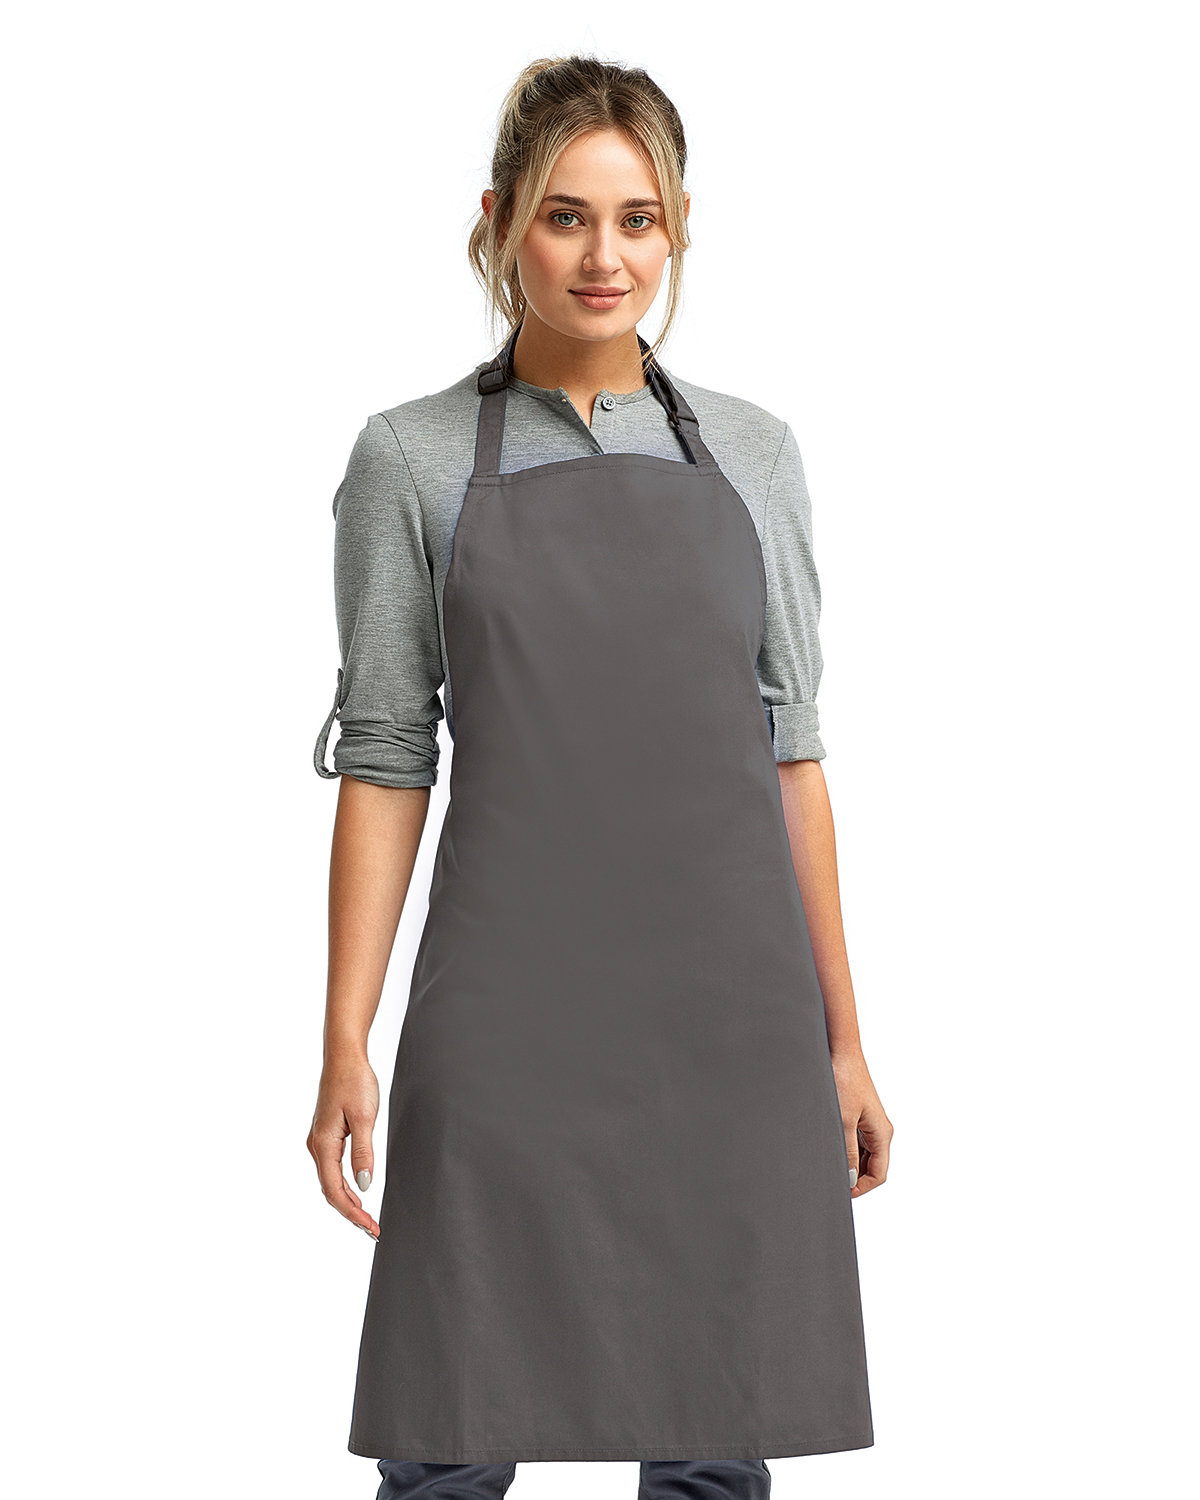 Artisan Collection by Reprime "Colours" Sustainable Bib Apron DARK GREY 